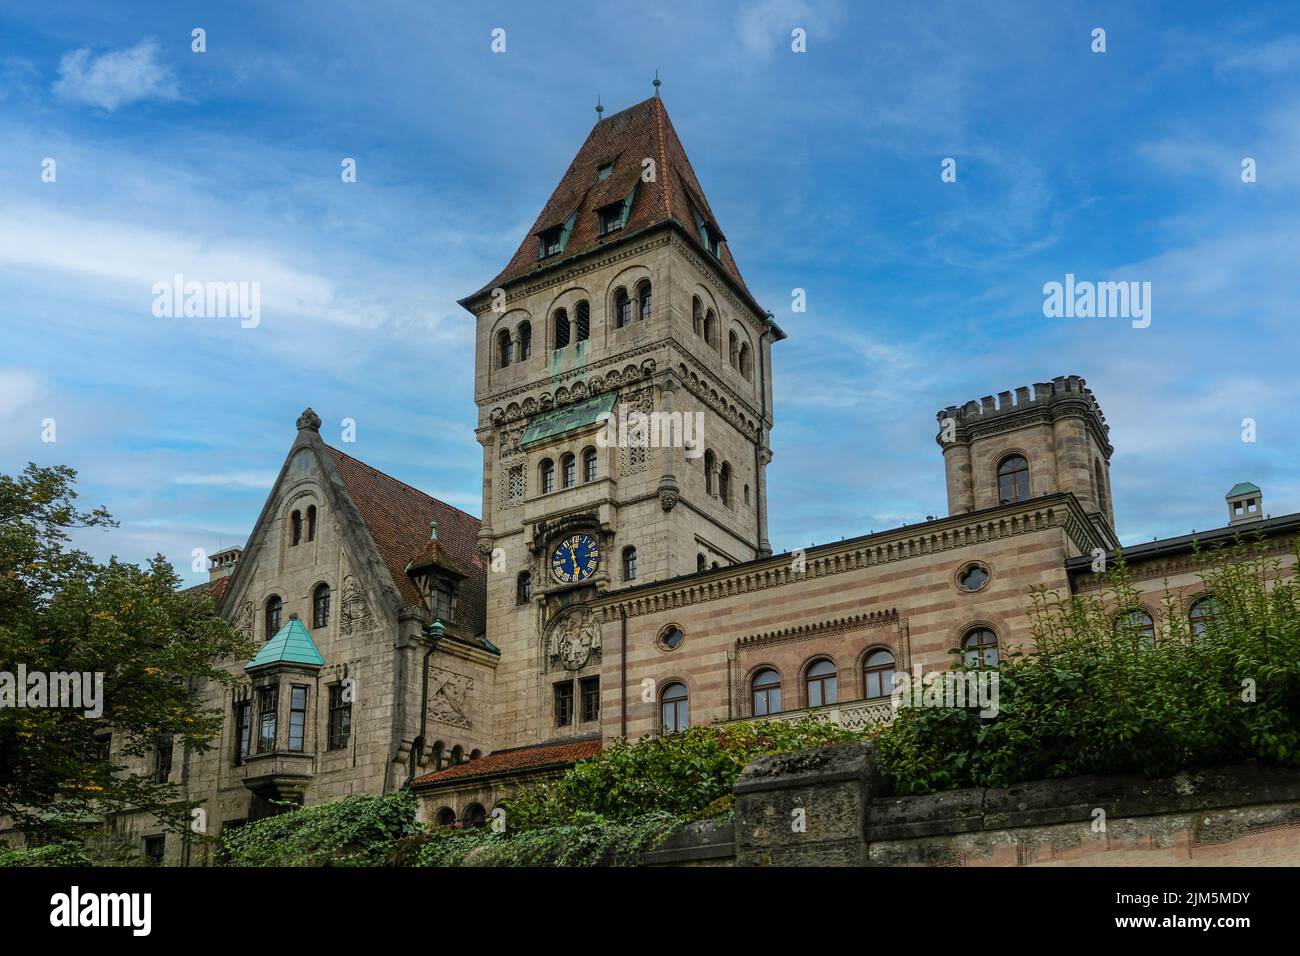 A view of the castle Stein of Faber-Castell stationery company in Nuremberg Stock Photo